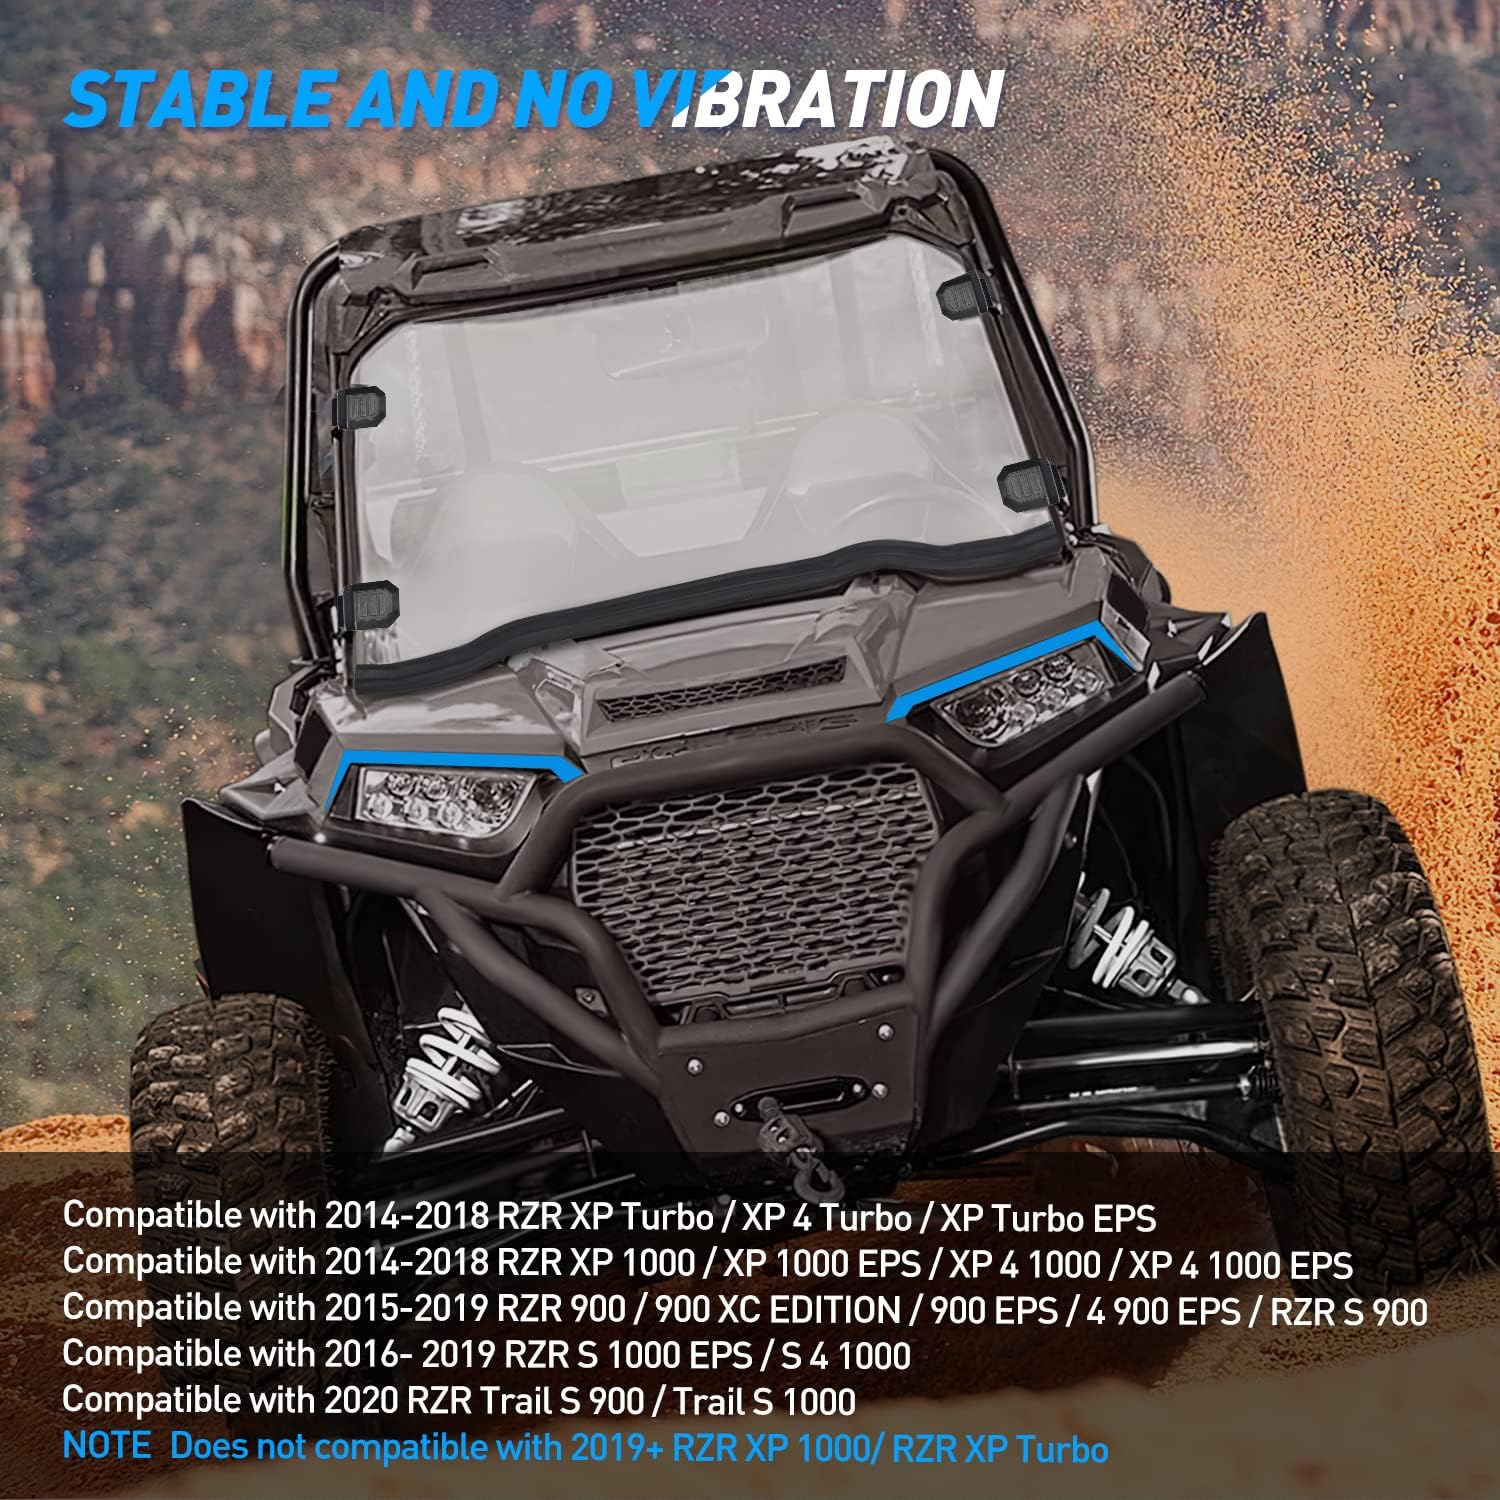 Front Full Windshield RZR 1000 Windshield Fit For 2014 2015 2016 2017 2018 Polaris RZR XP Turbo / XP 4 Turbo / XP Turbo EPS/ RZR XP 1000 / XP 1000 EPS / XP 4 1000 / XP 4 1000 EPS/ RZR 900